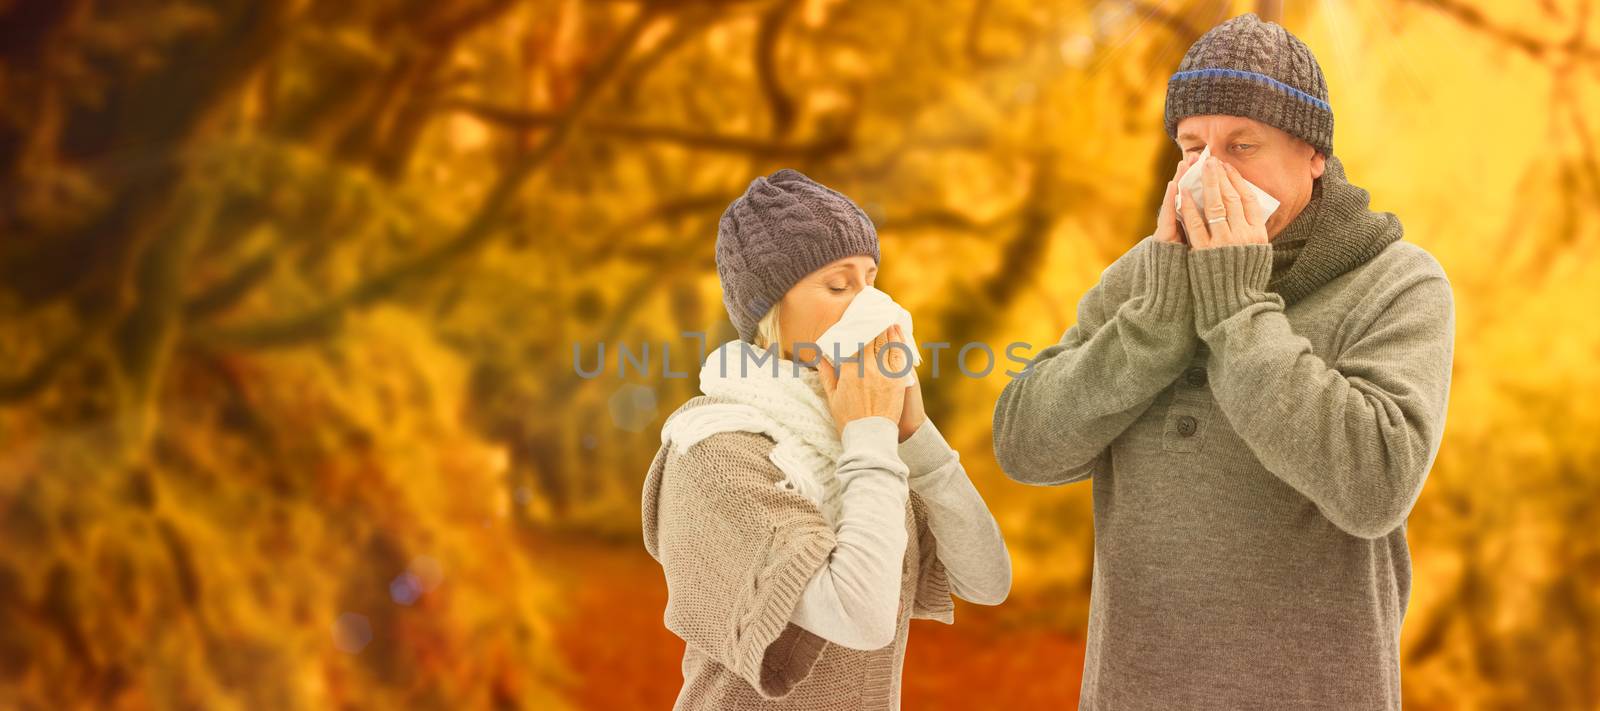 Sick mature couple blowing their noses against peaceful autumn scene in forest